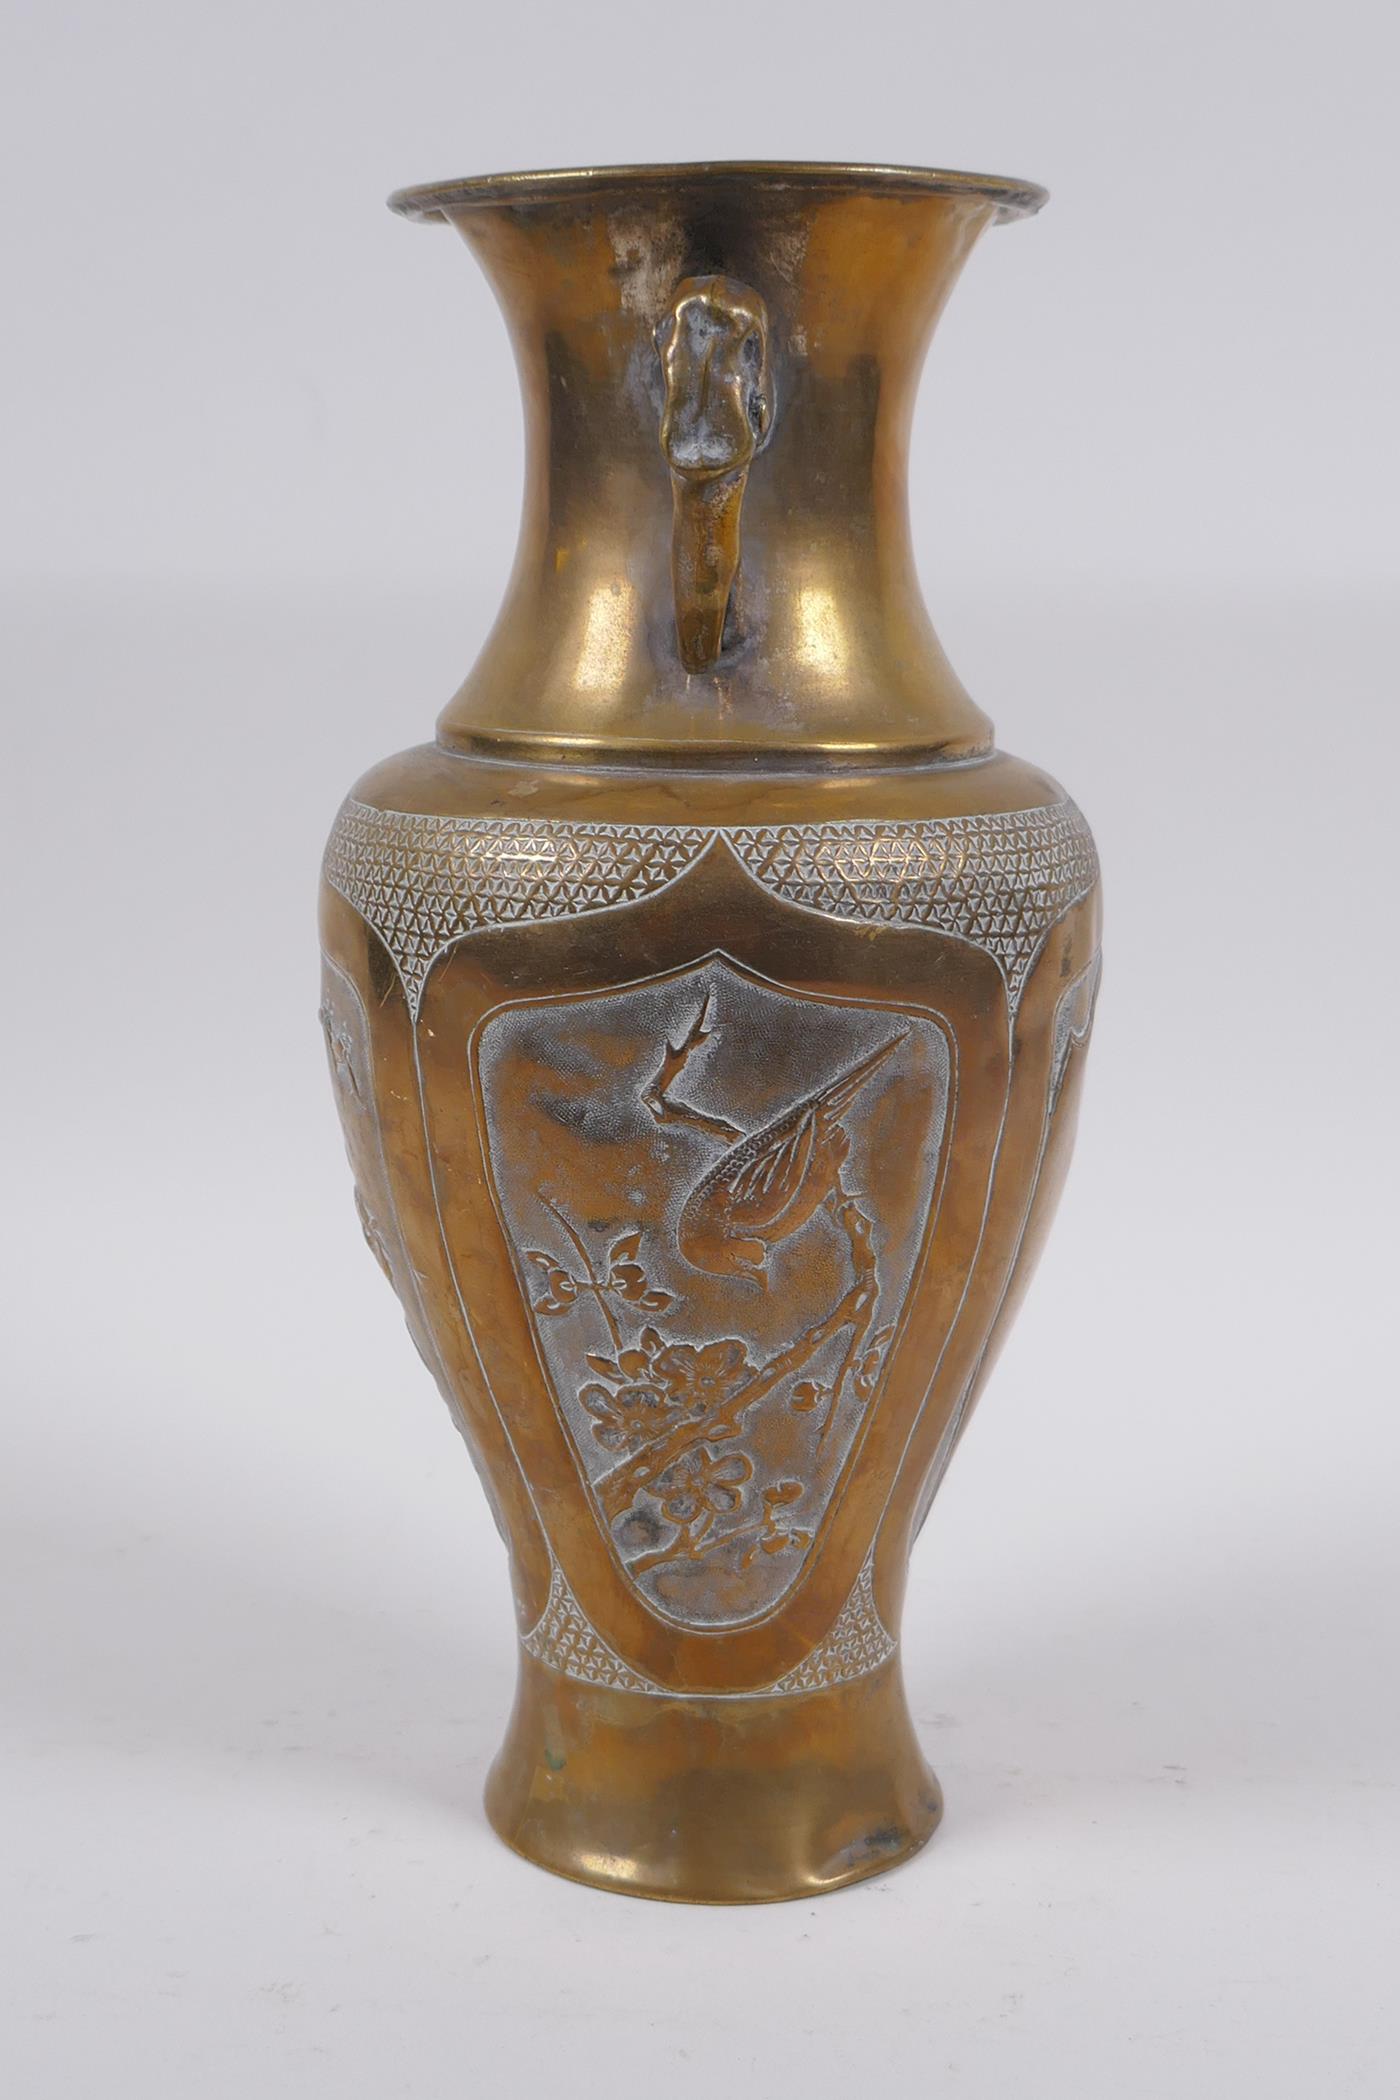 A Japanese Meiji bronze vase with two handles and decorative panels depicting birds and - Image 3 of 8